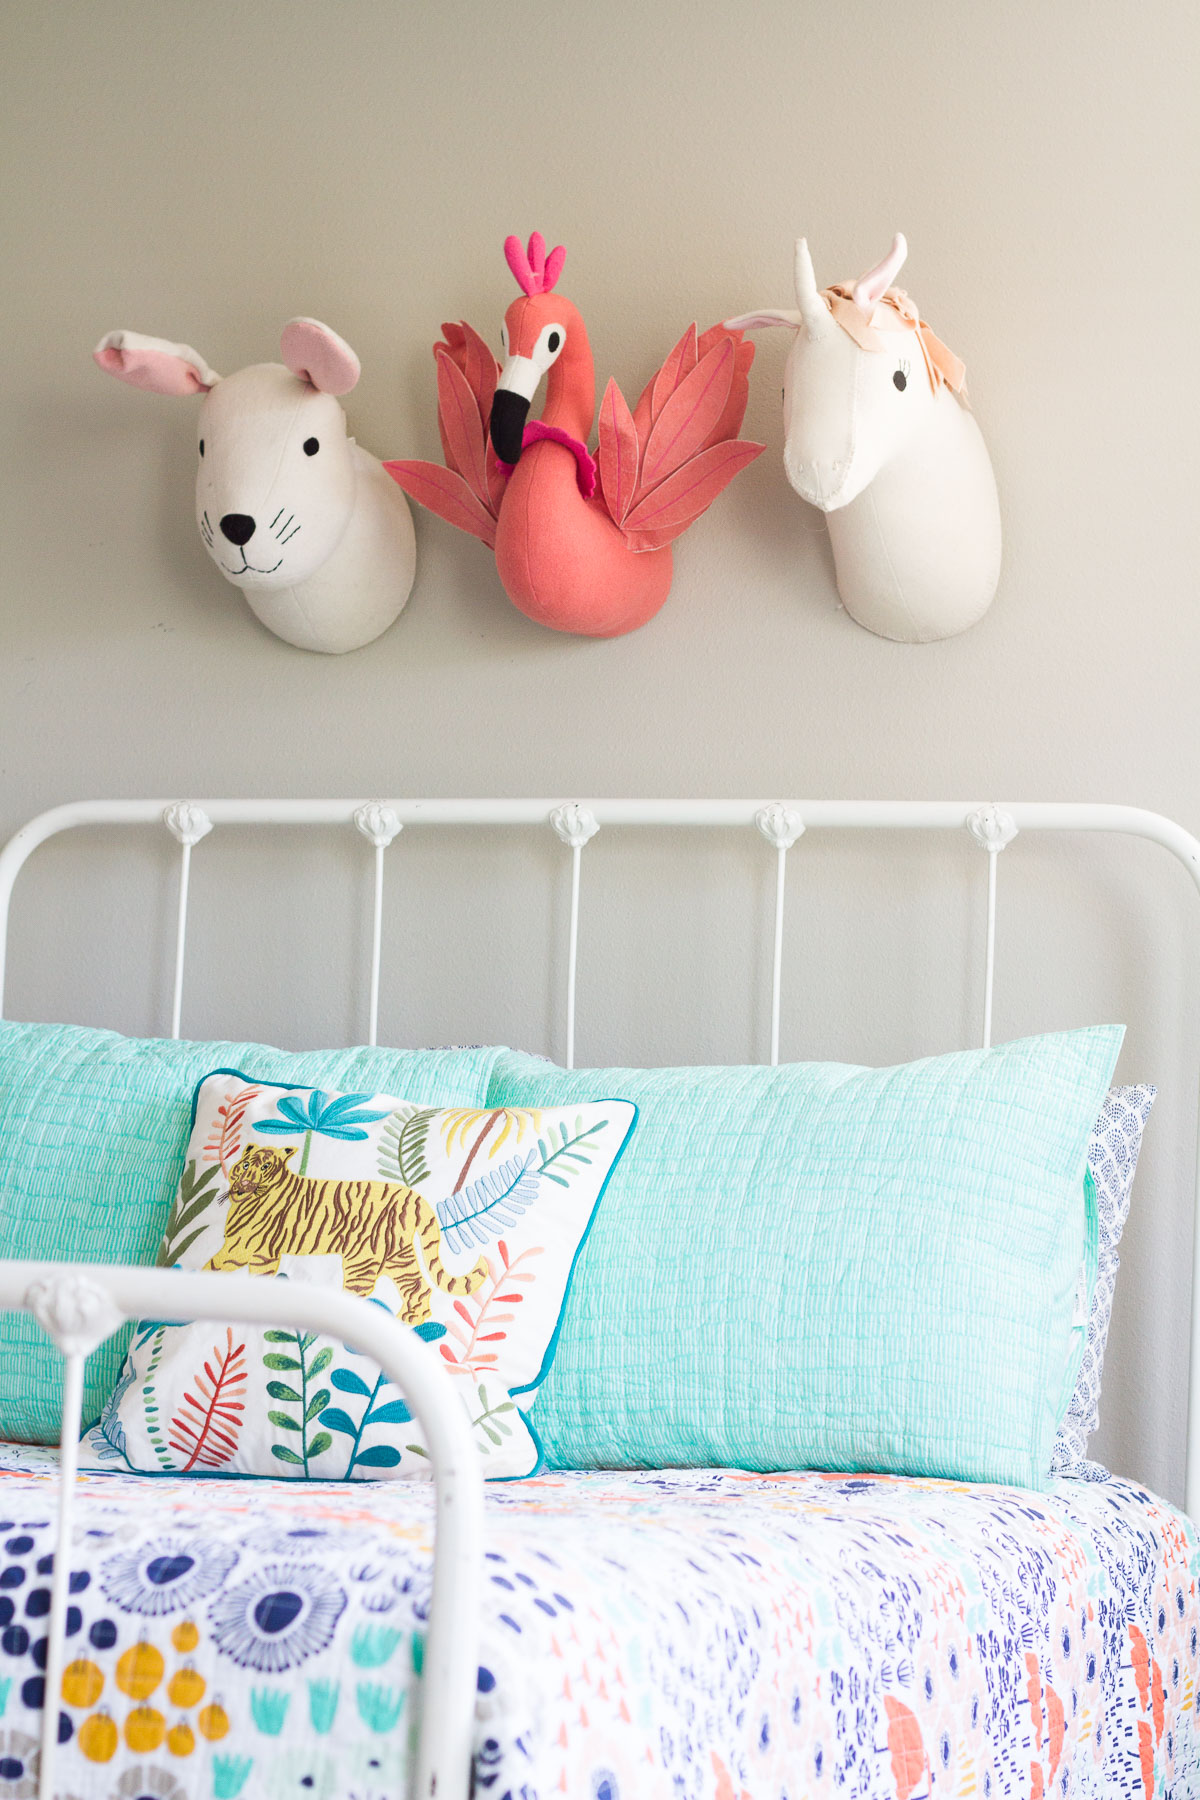 We finally finished our daughter's bedroom makeover for the Spring 2019 One Room Challenge! Check out our "english country garden/menagerie" room reveal.